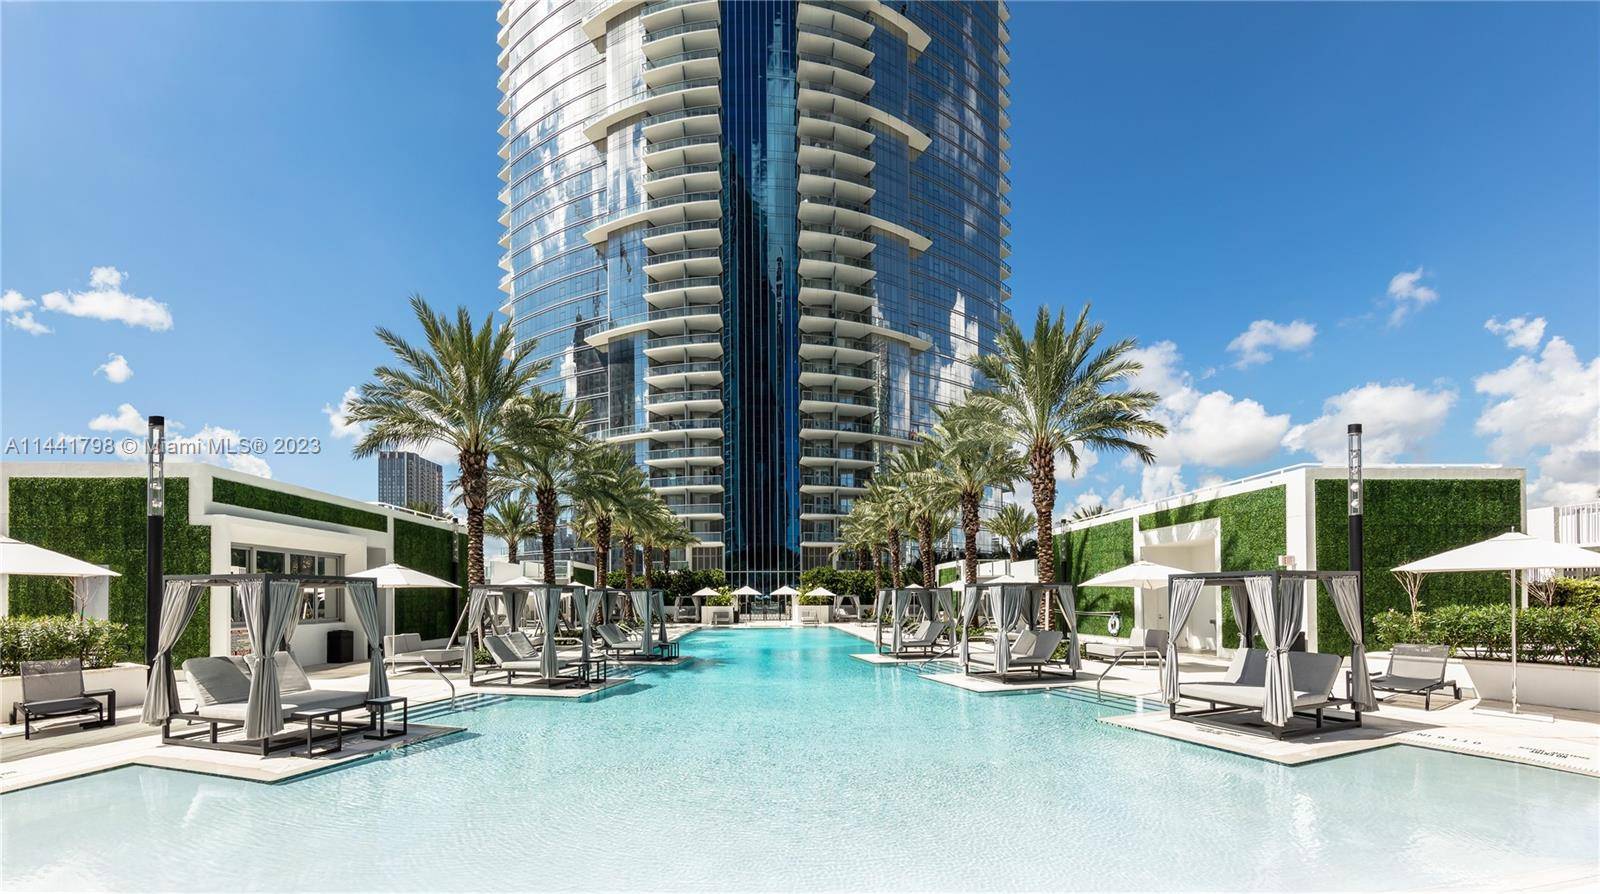 Discover the epitome of luxury living at Paramount Miami !